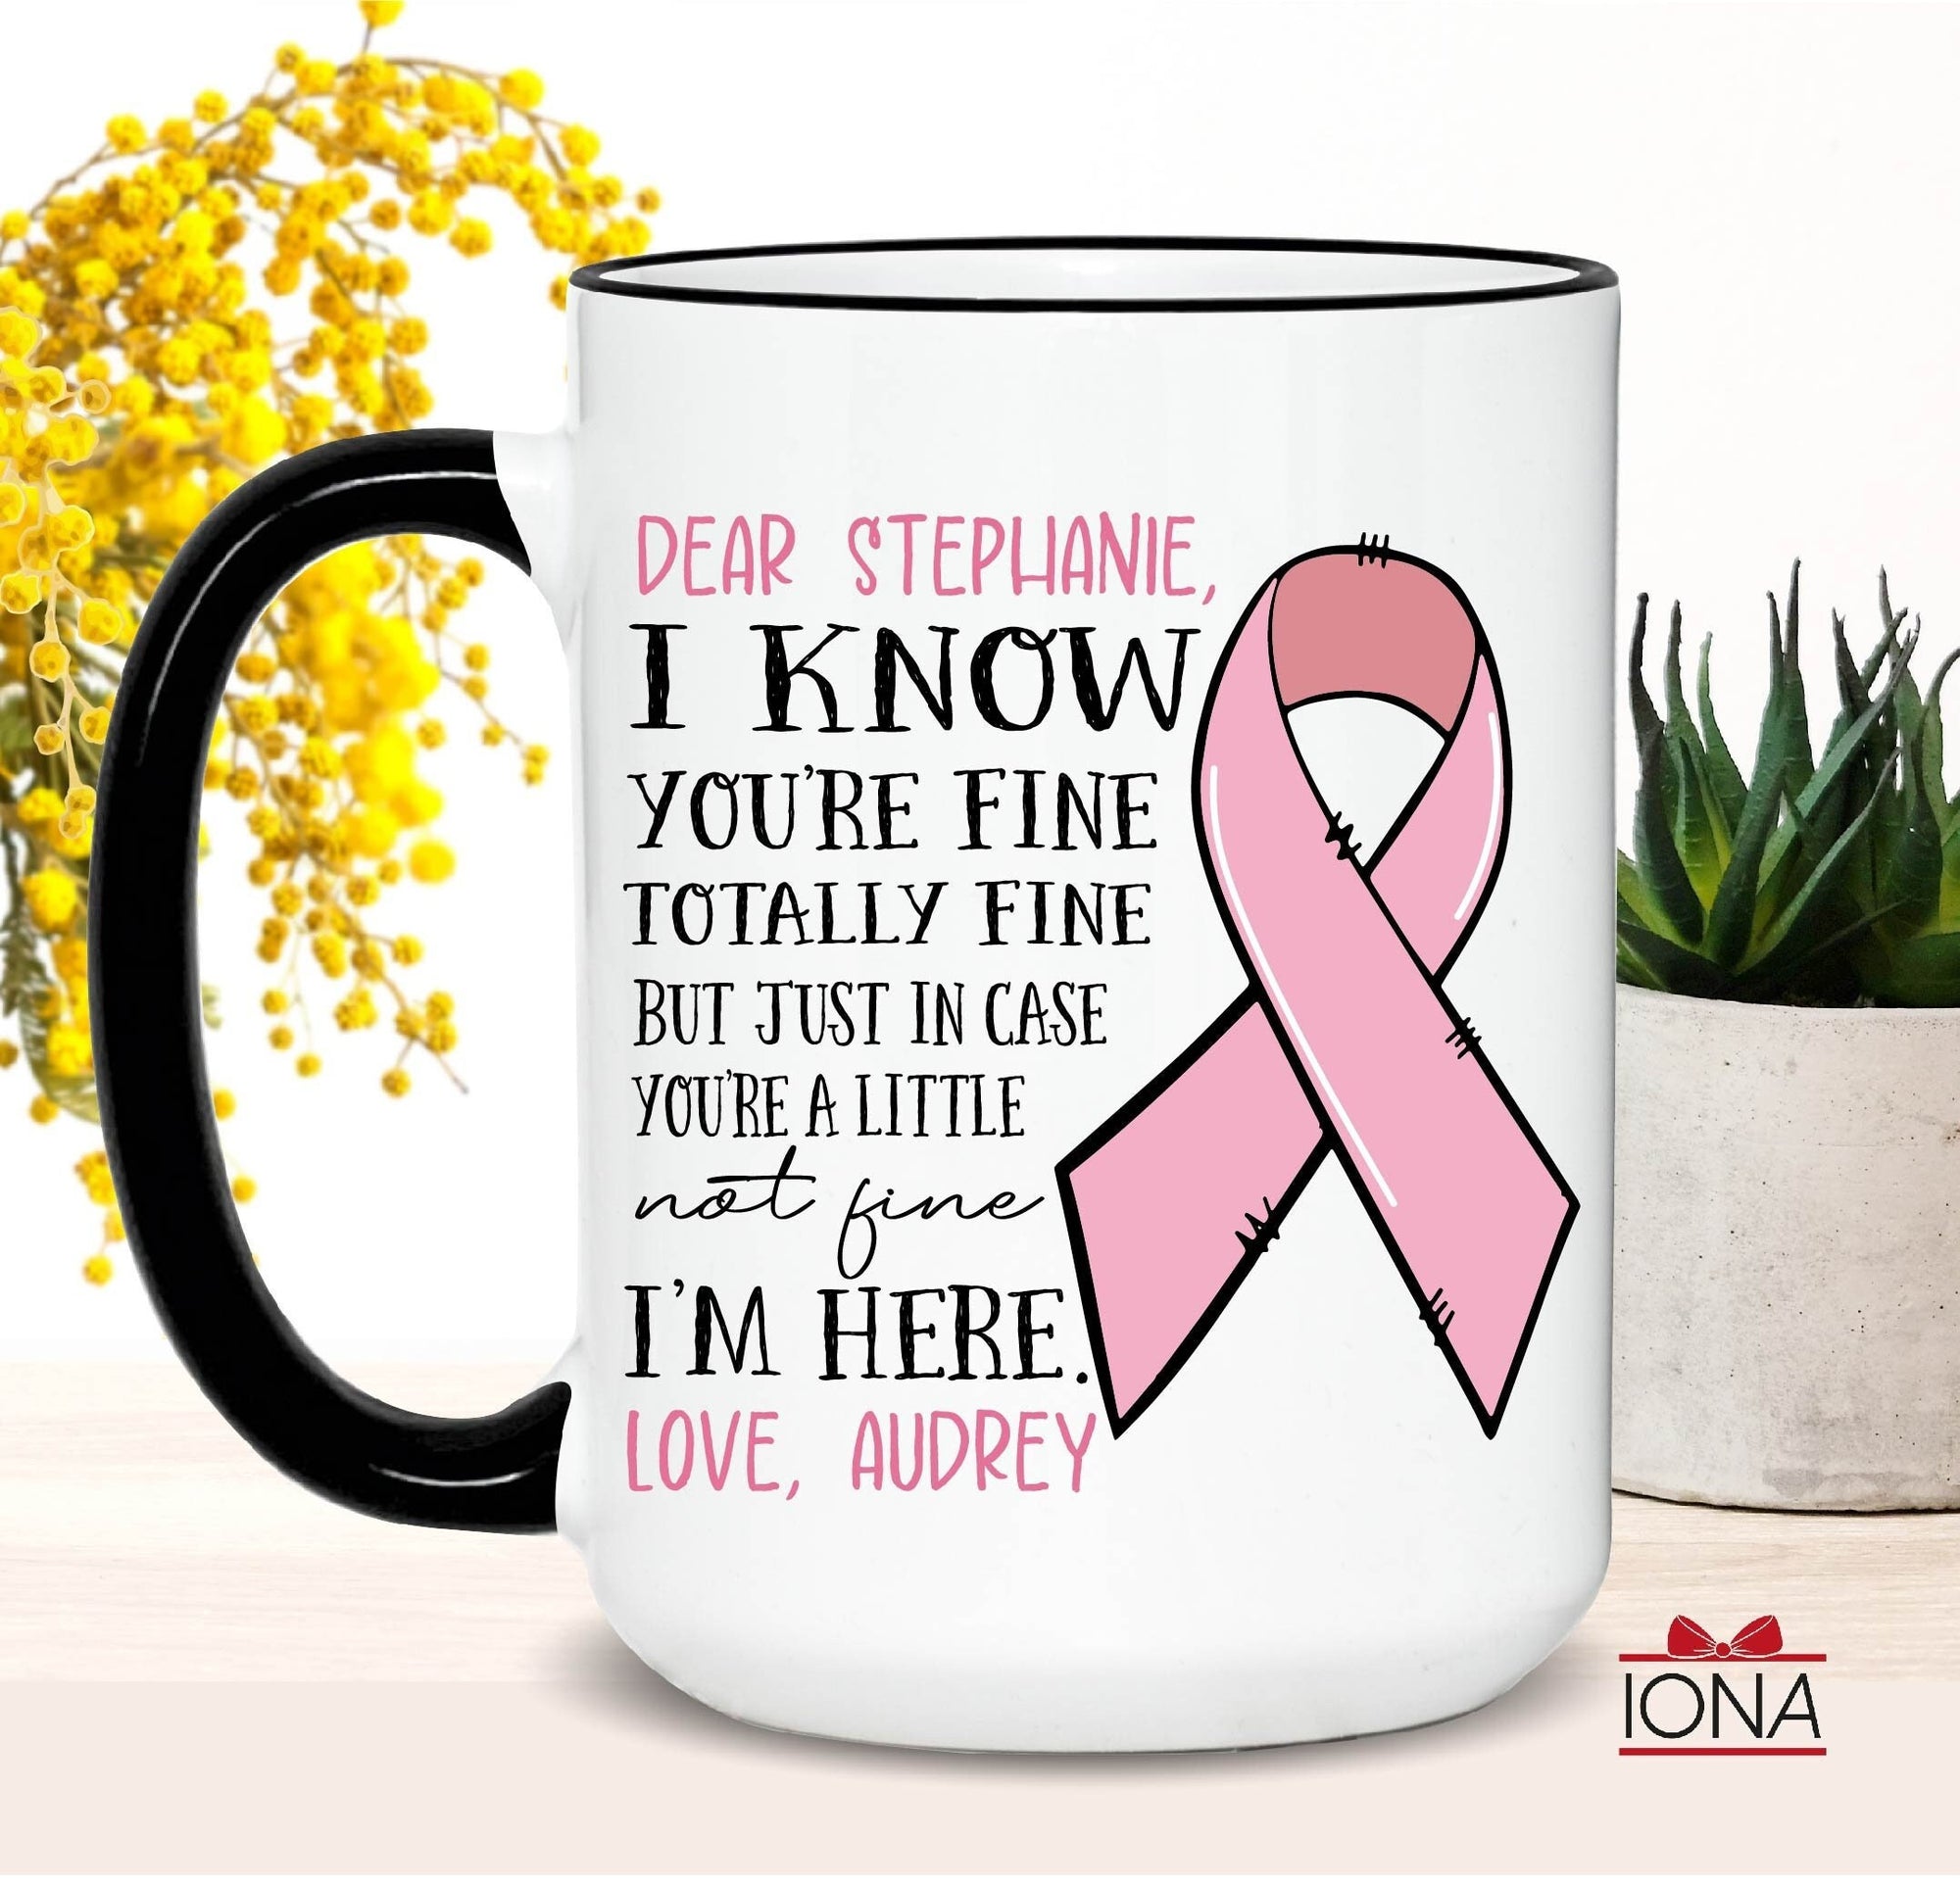 Personalized Cancer Support Gift, Breast Cancer Awareness, Cancer Encouragement Gift, Warrior Gift, Cancer Fighter Gift, Cancer Survivor Mug